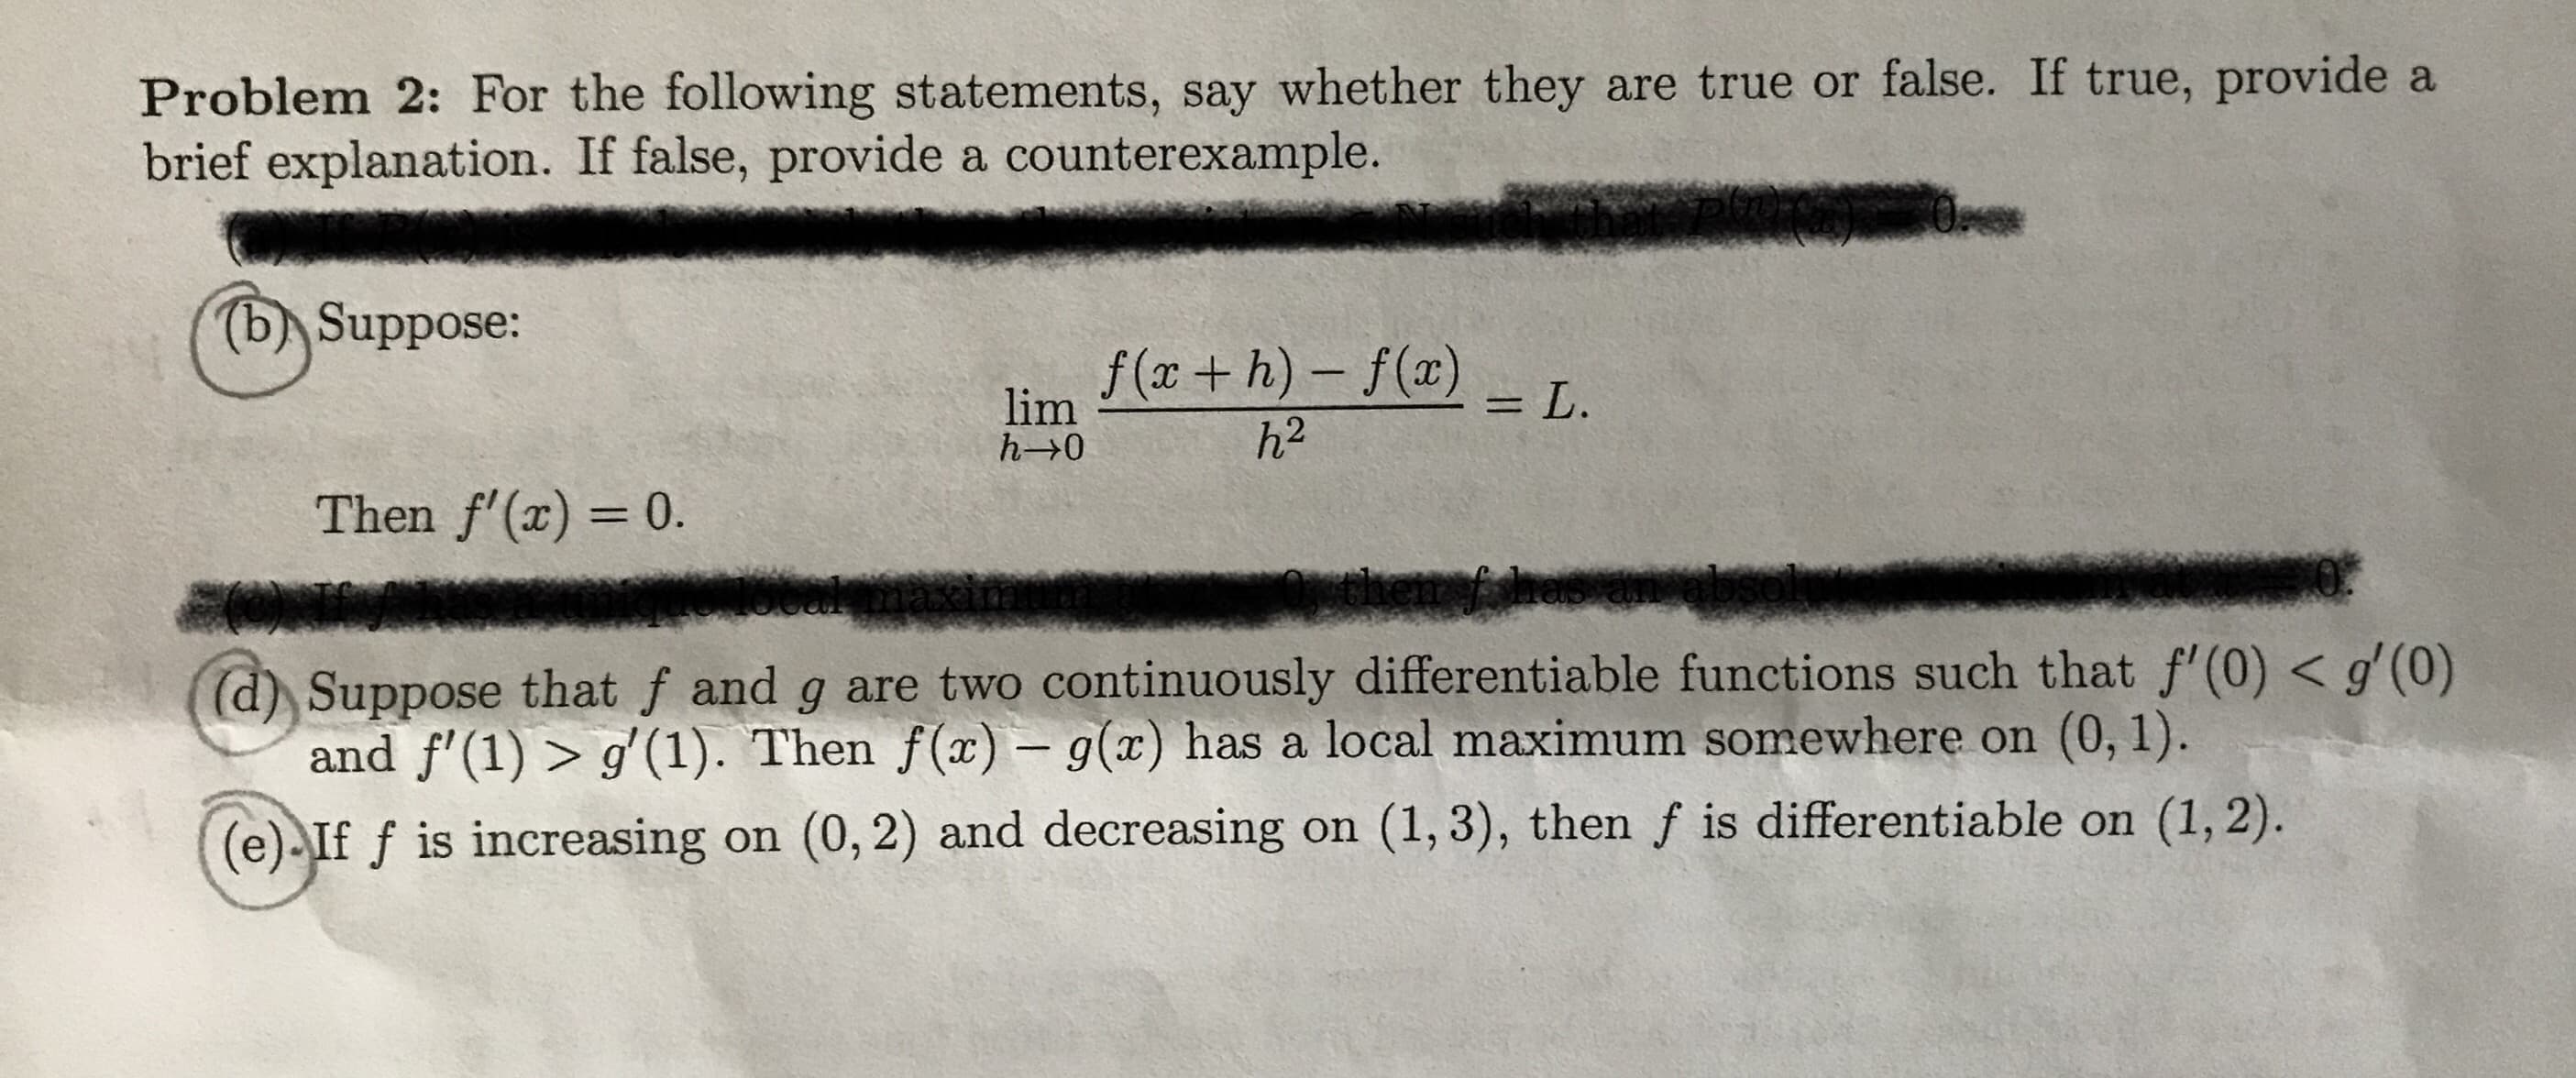 Problem 2: For the following statements, say whether they are true or false. If true, provide a
brief explanation. If false, provide a counterexample.
(bASuppose:
f(x+h)- f(a)
= L
lim
h- 0
h2
Then f'(x) 0.
(d) Suppose that f and g are two continuously differentiable functions such that f' (0) < g'(0)
and f'(1)> g' (1). Then f(x) - g(x) has a local maximum somewhere on (0, 1).
(e) If f is increasing on (0,2) and decreasing on (1, 3), then f is differentiable on (1, 2)
